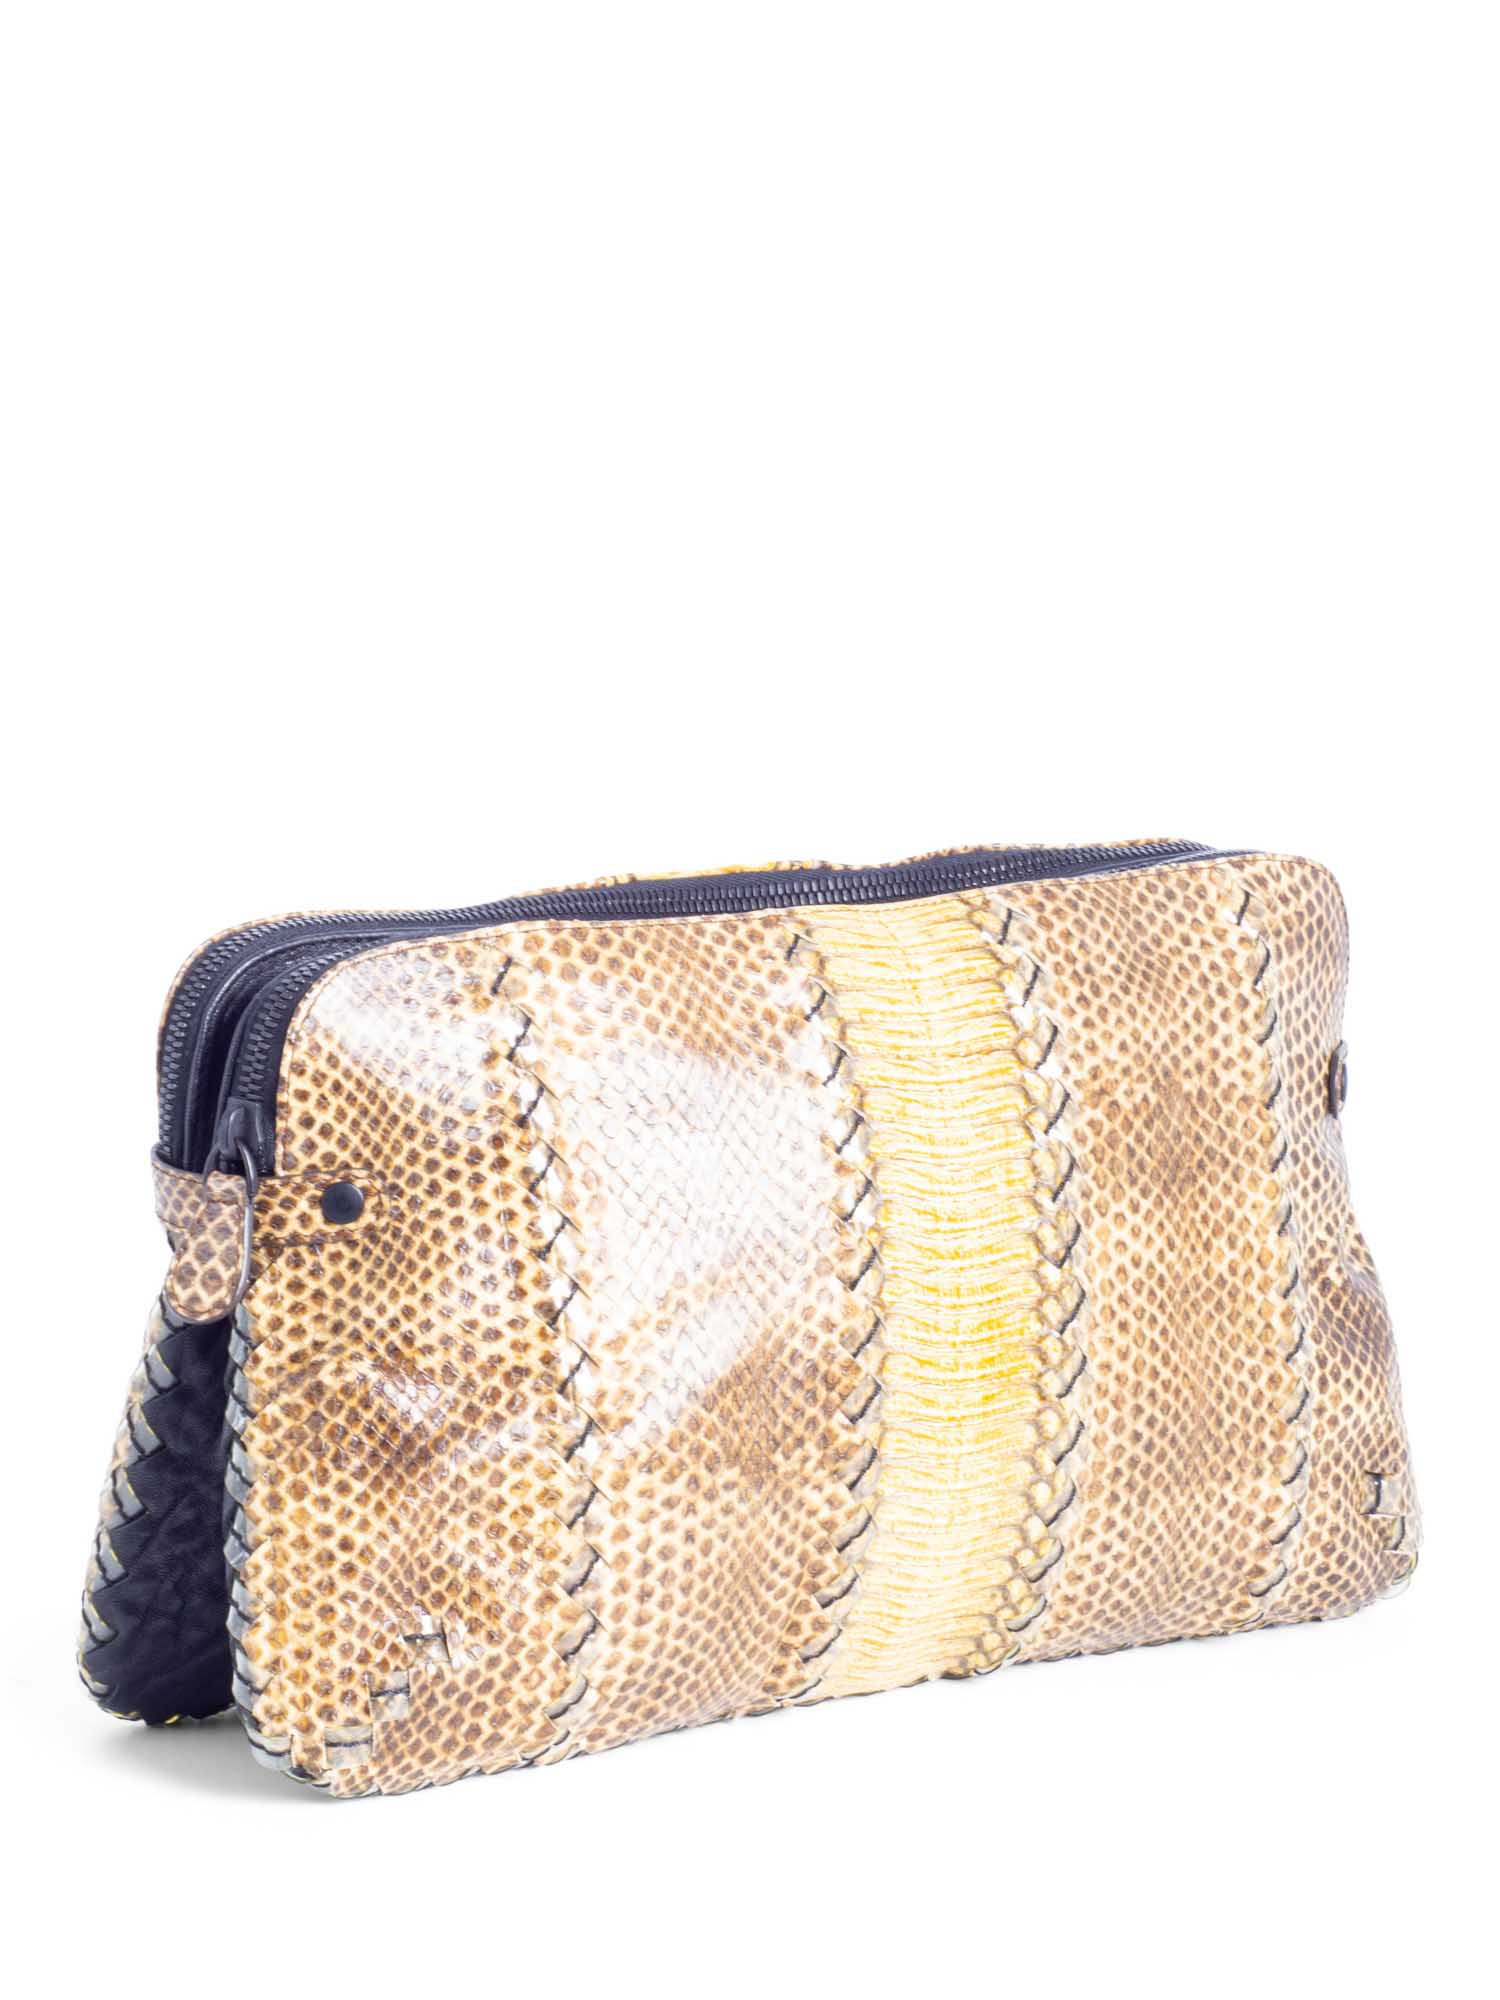 Sold at Auction: An Hermes Bearn Ostrich Wallet